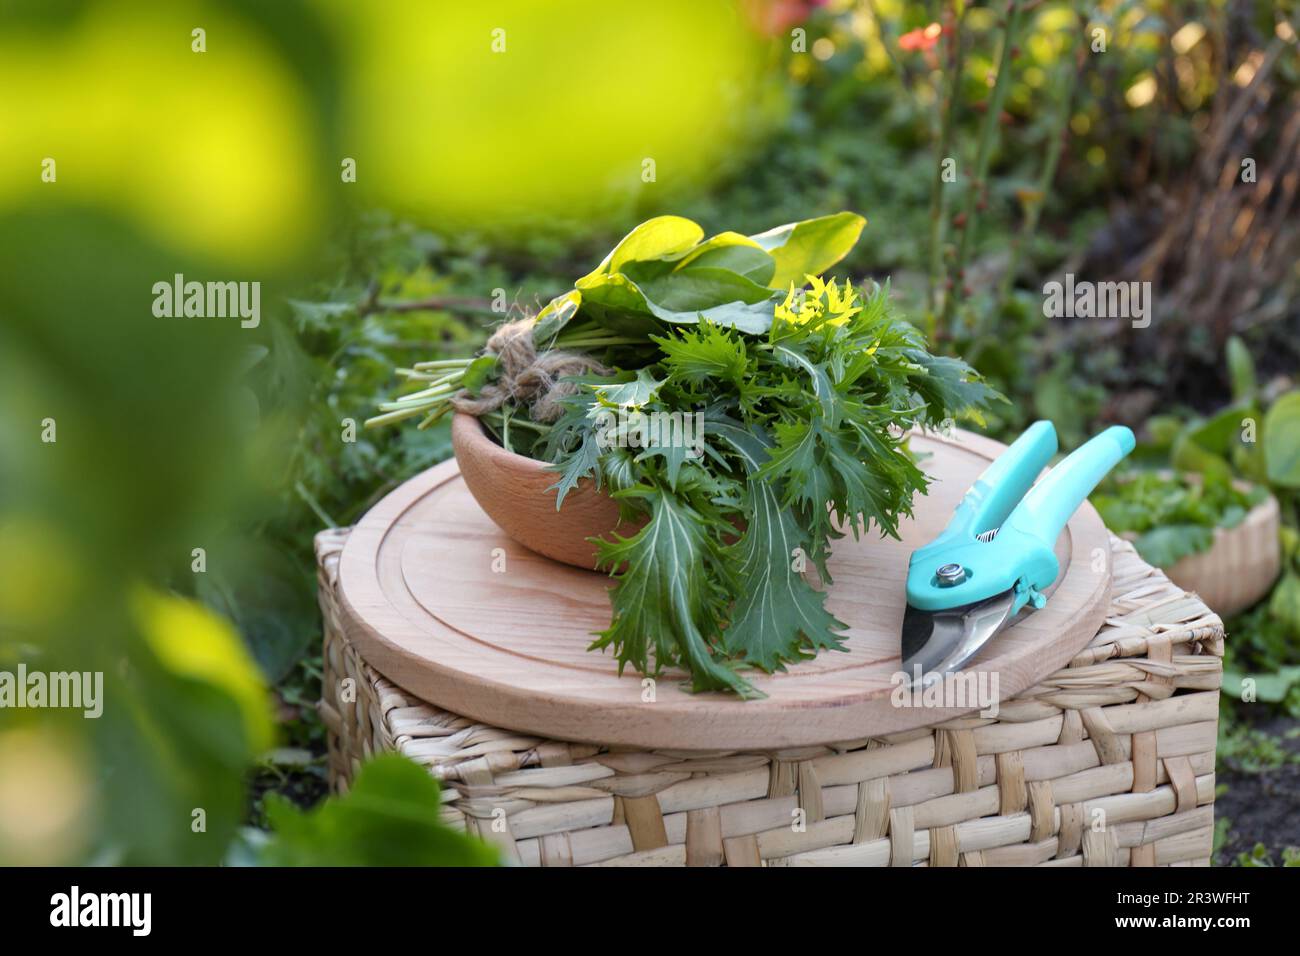 Wooden board with fresh green herbs and pruner on wicker basket outdoors Stock Photo